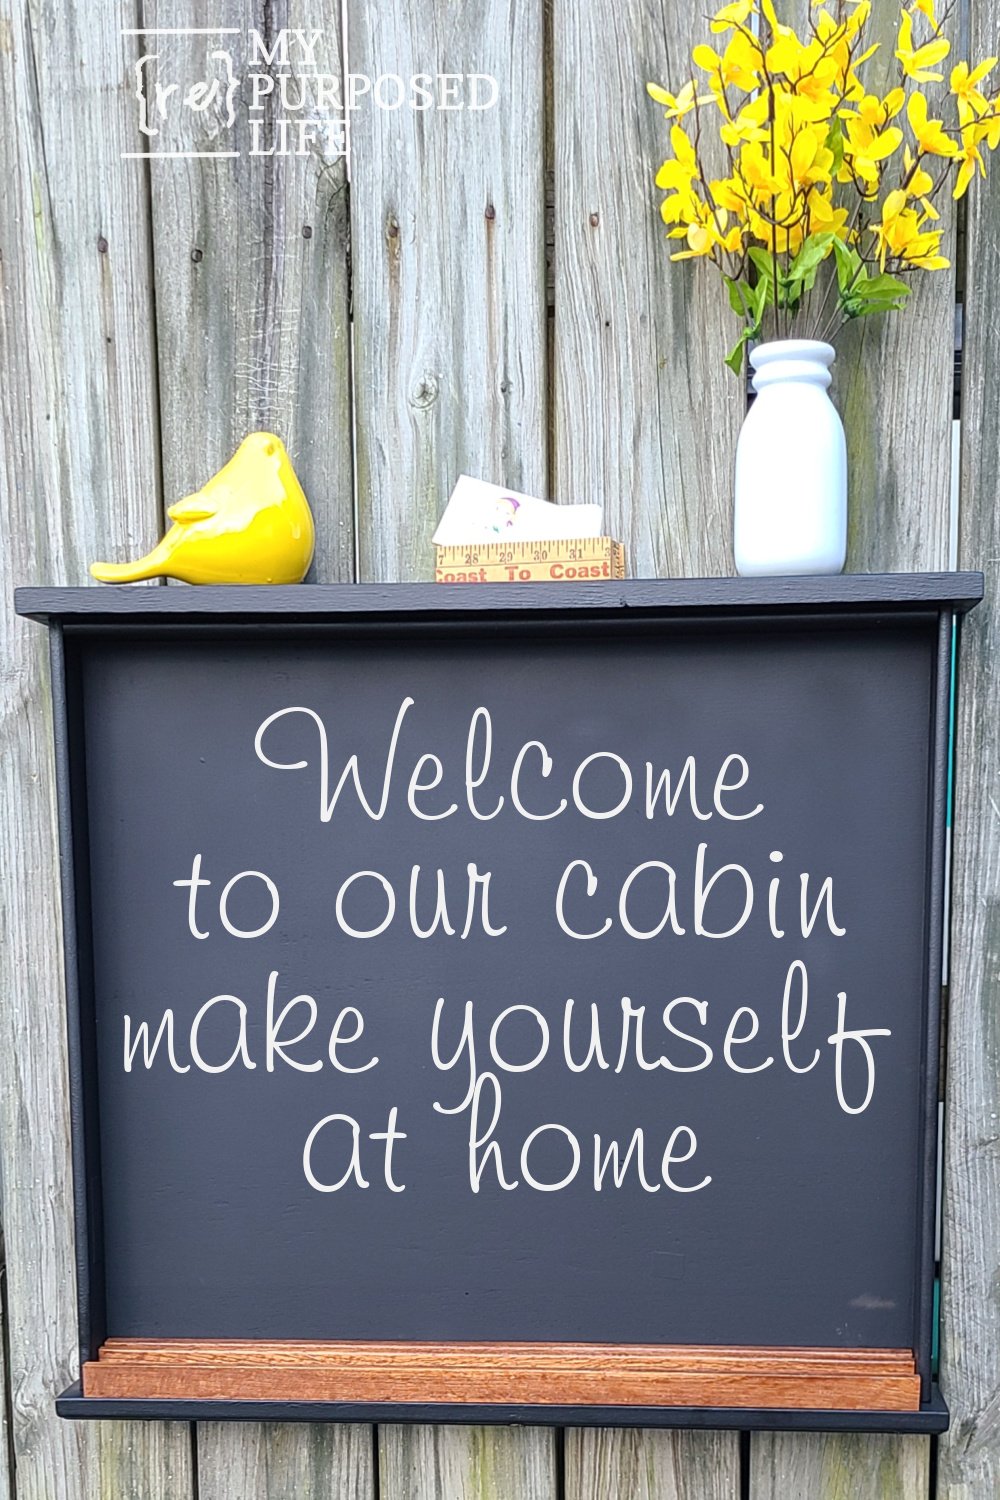 Step by step directions and tips on making a desk drawer chalkboard. This is a perfect weekend project to make for your home or vacation home. #MyRepurposedLife #repurposed #furniture #desk #drawer #chalkboard #easy #diy via @repurposedlife